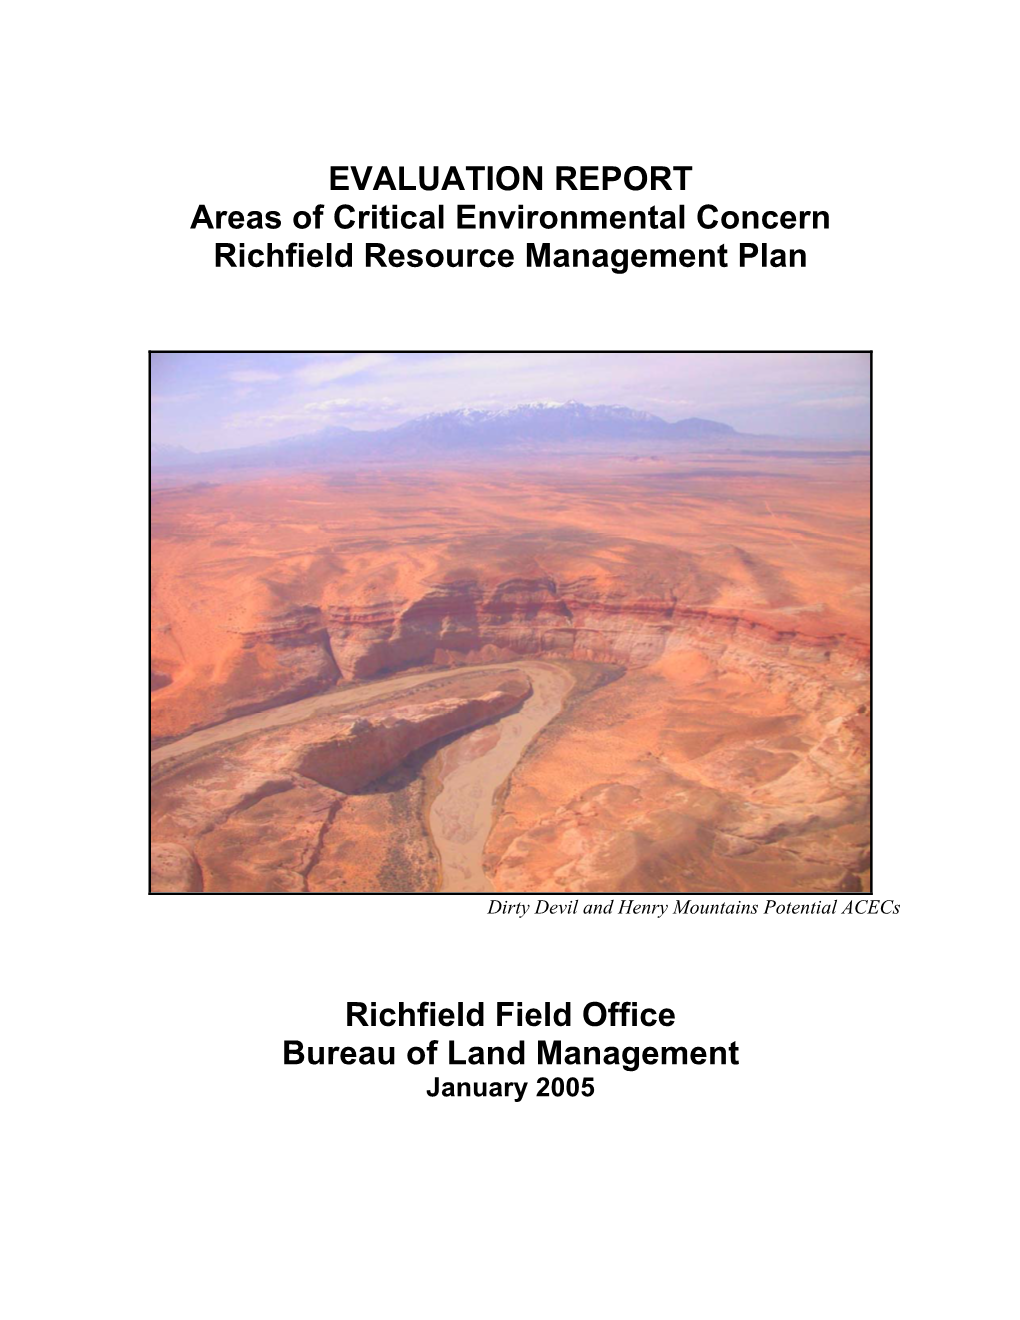 EVALUATION REPORT Areas of Critical Environmental Concern Richfield Resource Management Plan